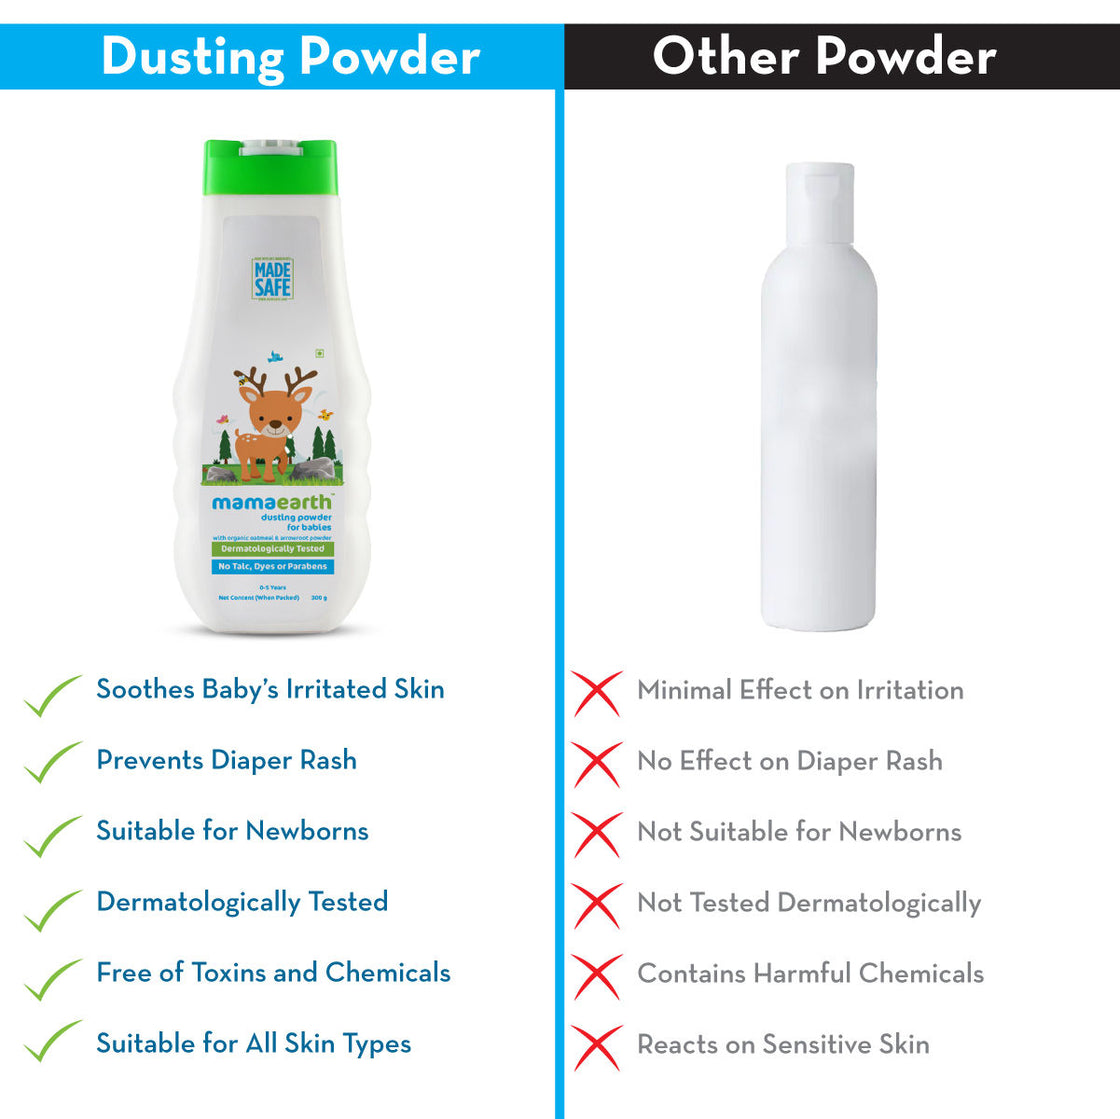 Mamaearth Dusting Powder With Organic Oatmeal & Arrowroot Powder For Babies-4